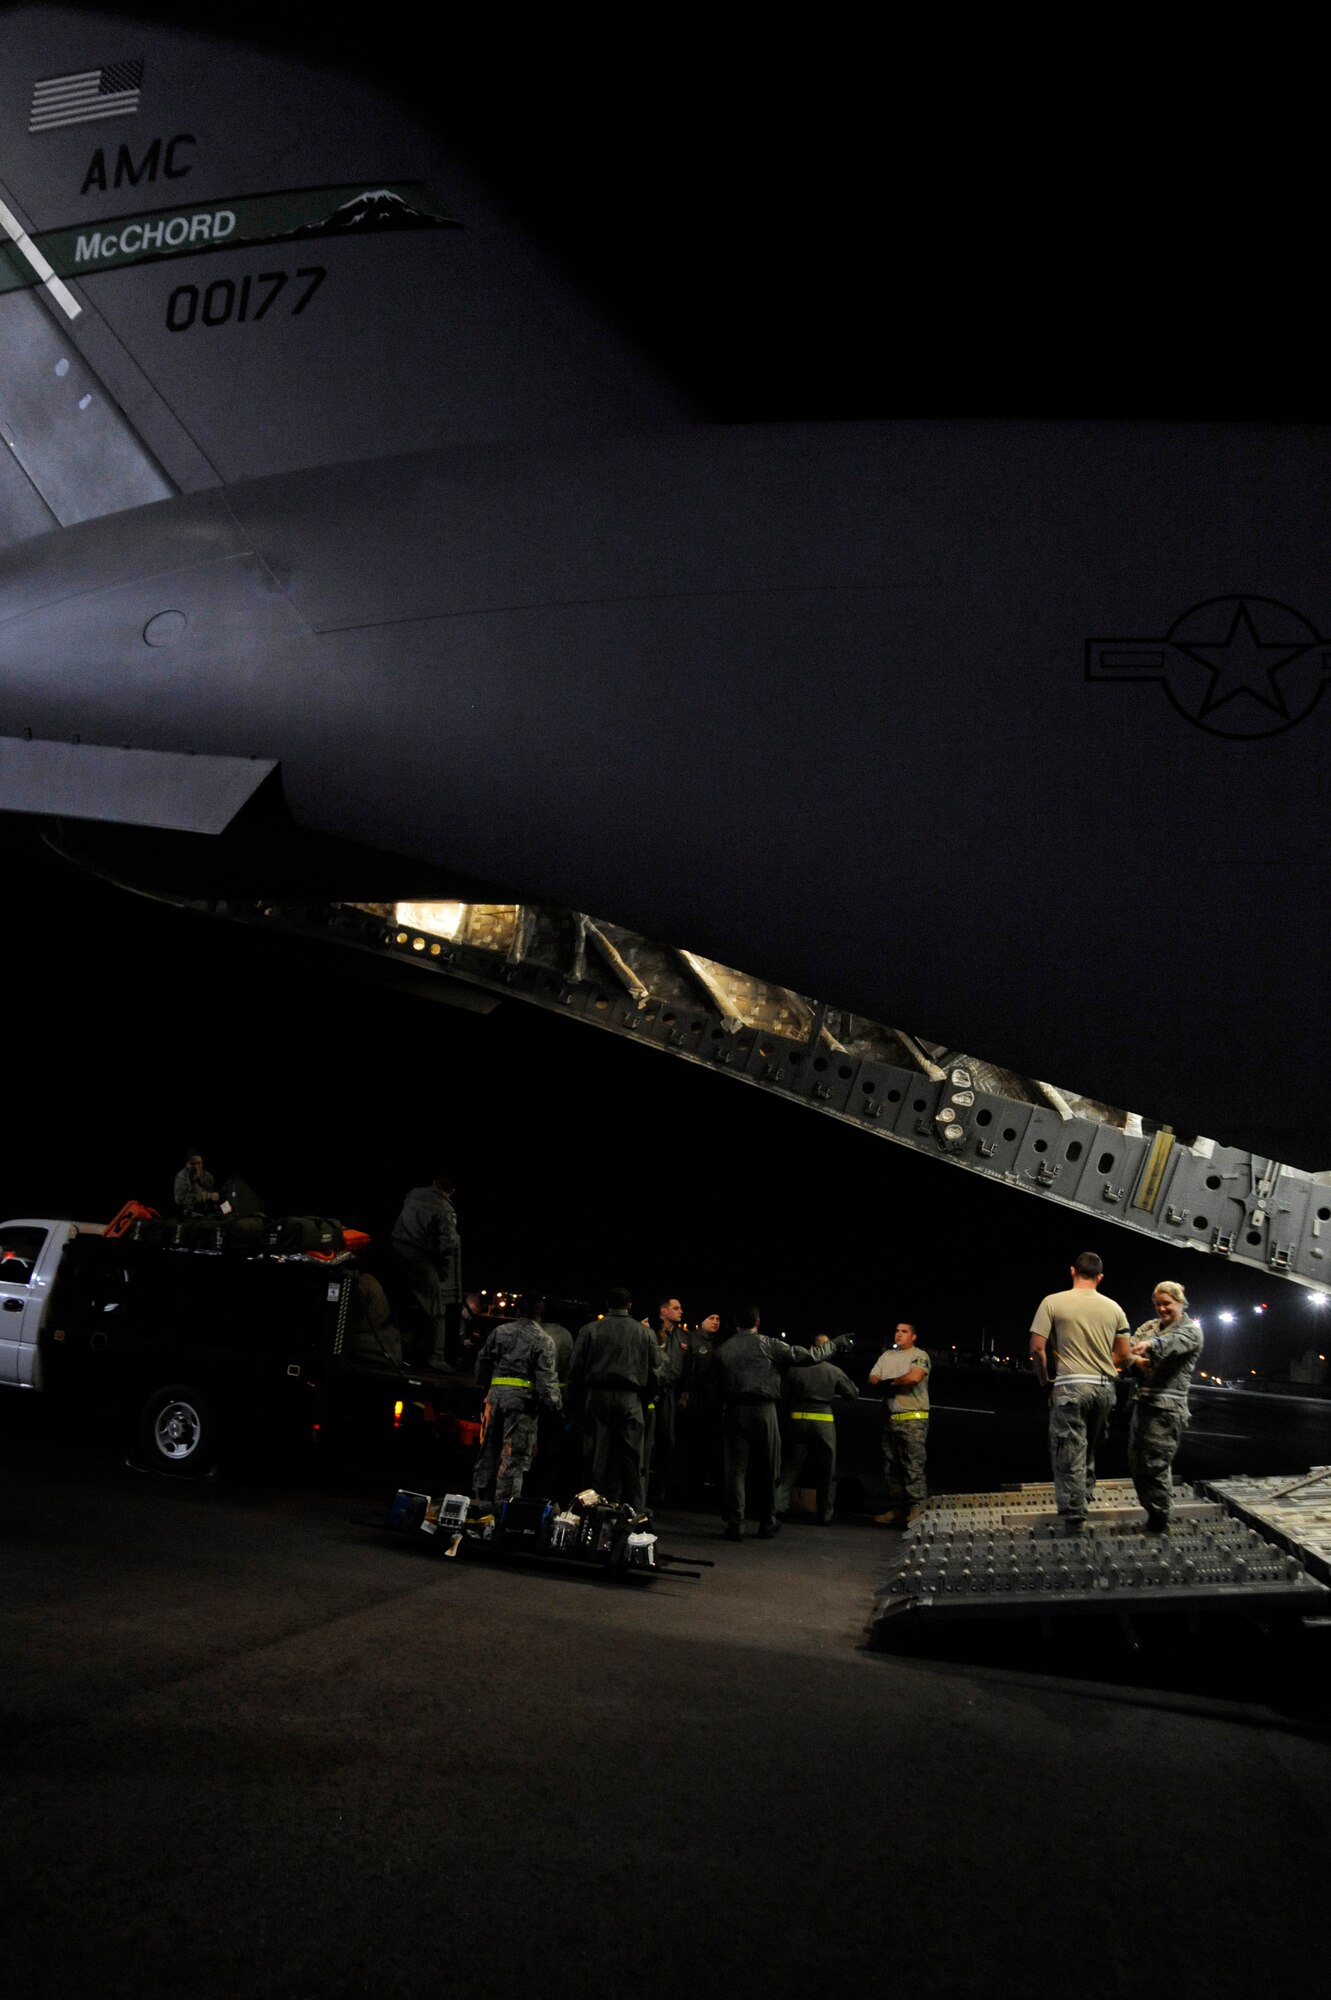 A C-17 aircraft from McChord Air Force Base, Wash. is unloaded at MacDill Air Force Base Jan. 18. The C-17 was full of medical supplies along with a Mobile Aeromedical Staging Facility team from the 6th Air Mobility Wing headed to Haiti to provide medical aide to the victims of last weeks earthquake.
(U.S. Air Force photo by Staff Sgt. Joseph Swafford) 